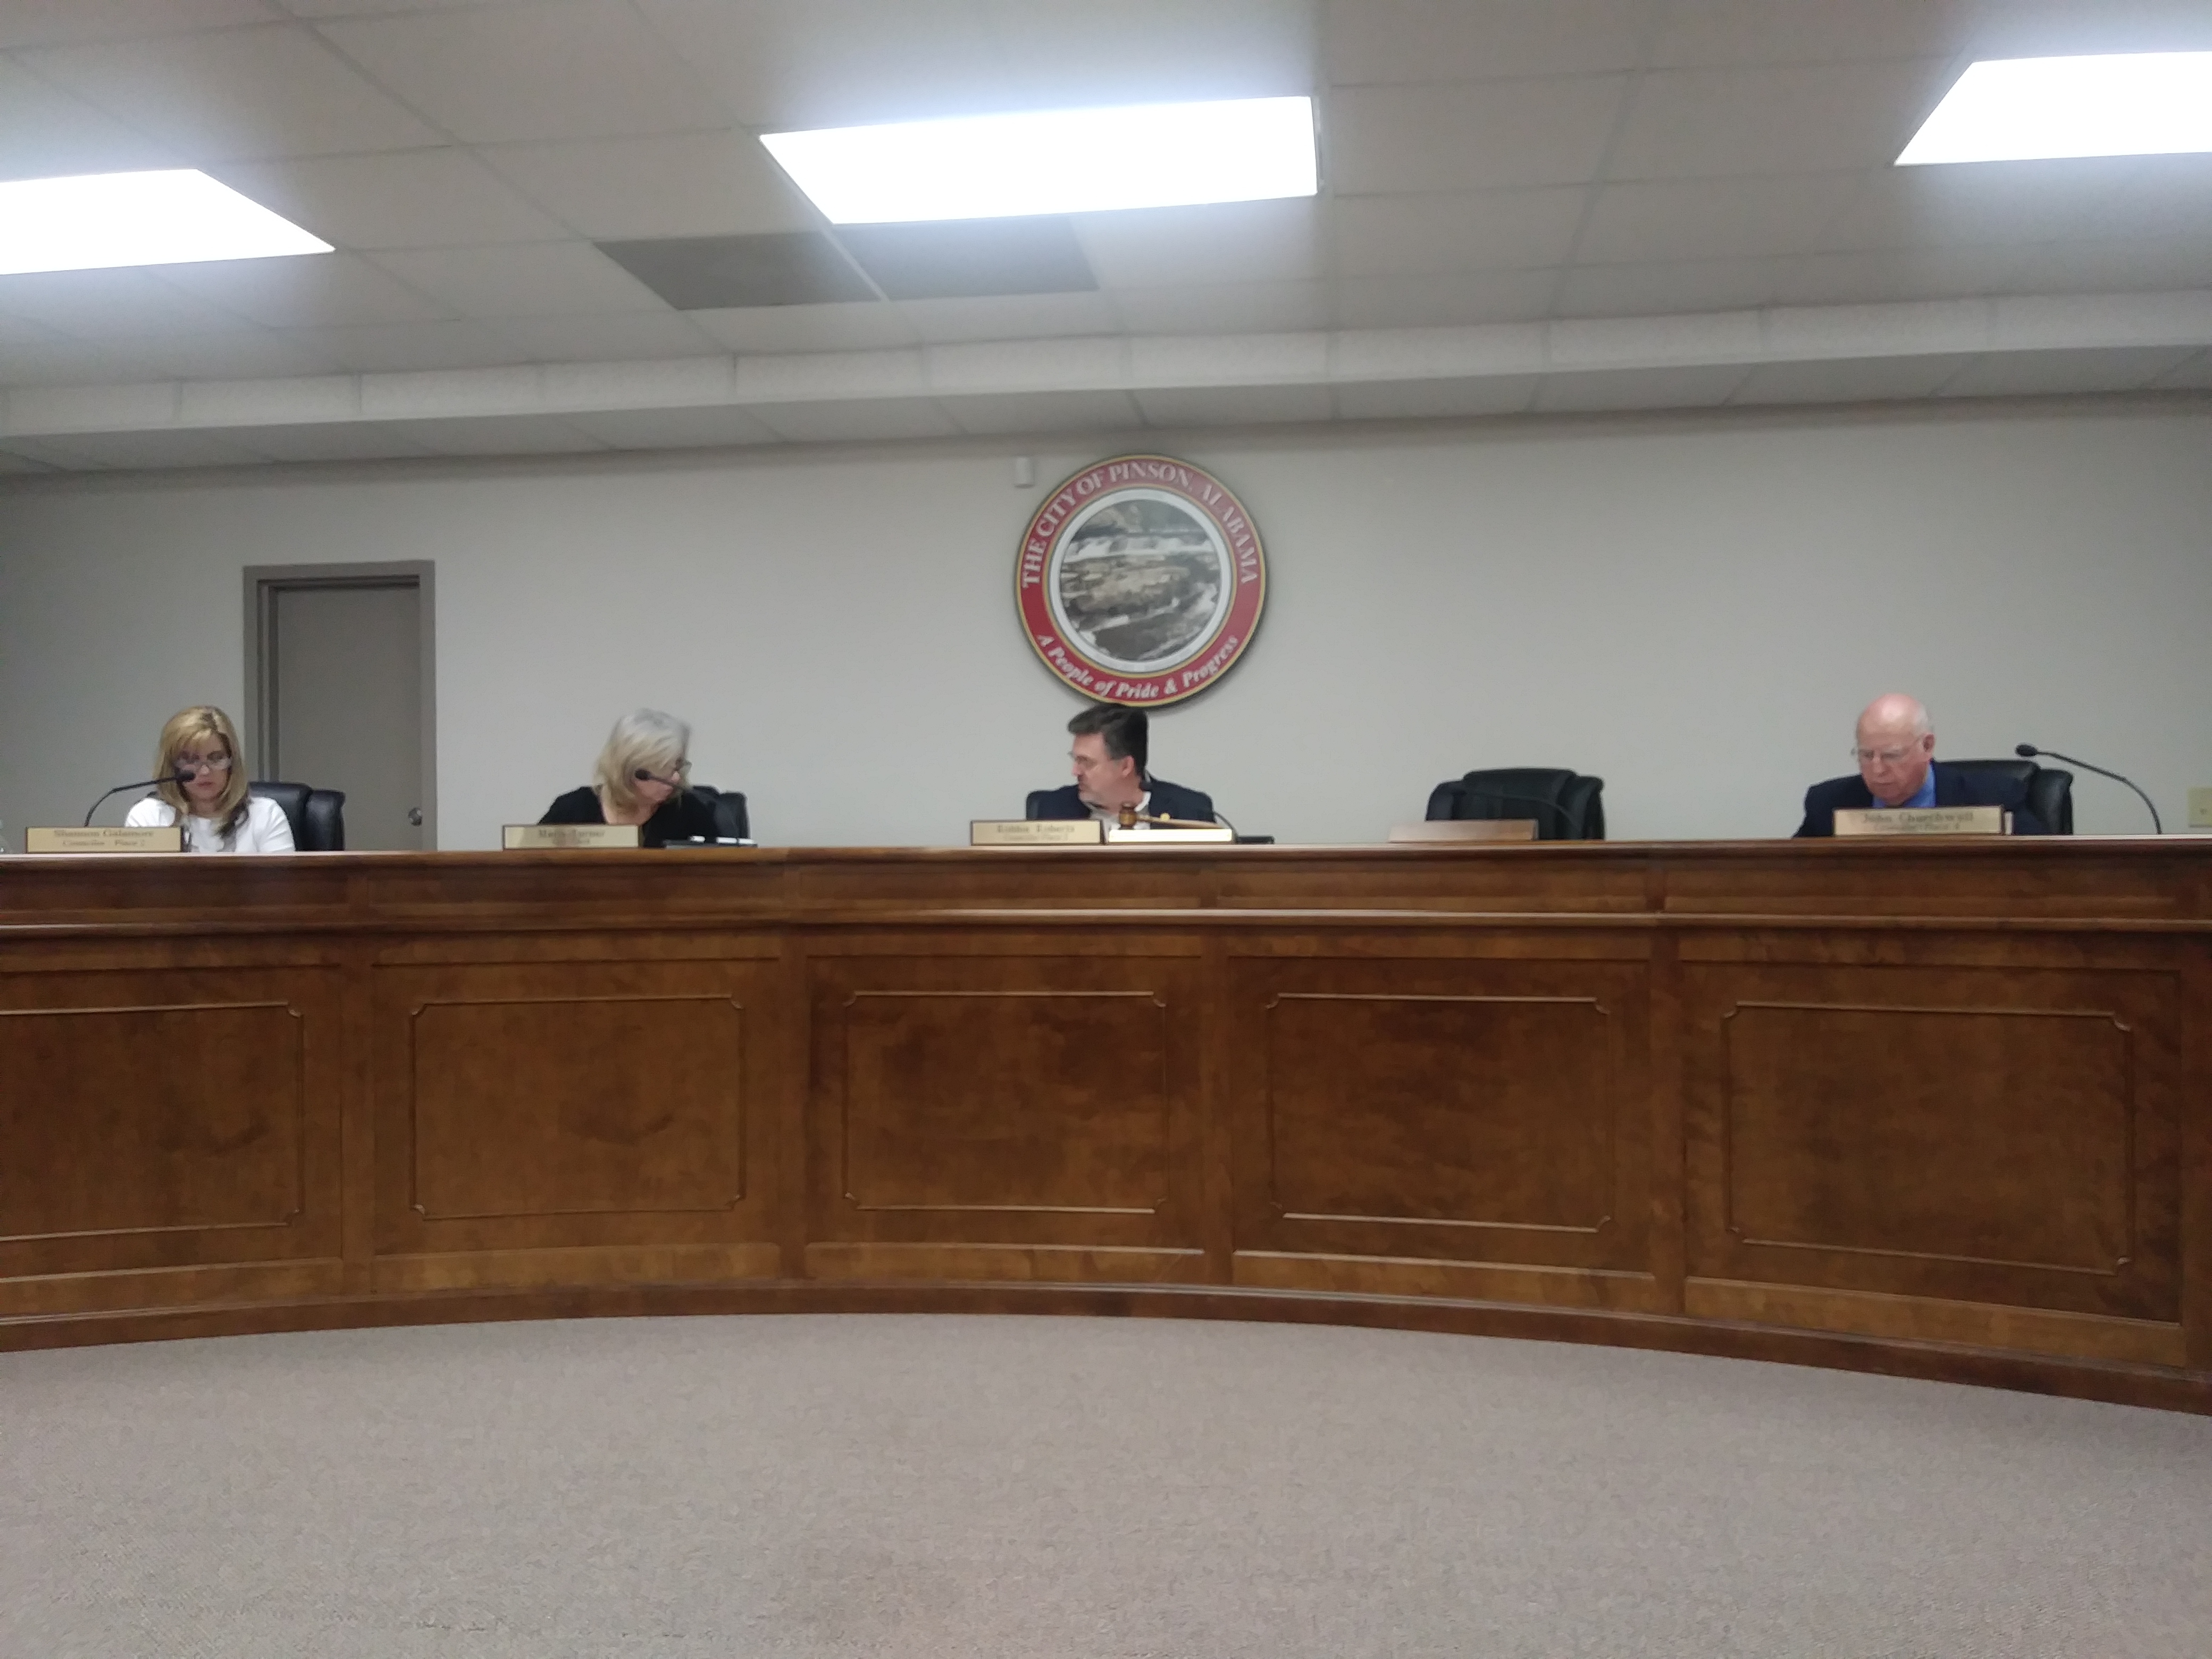 Pinson City Council authorizes up to $7,000 for Bradford Park irrigation system